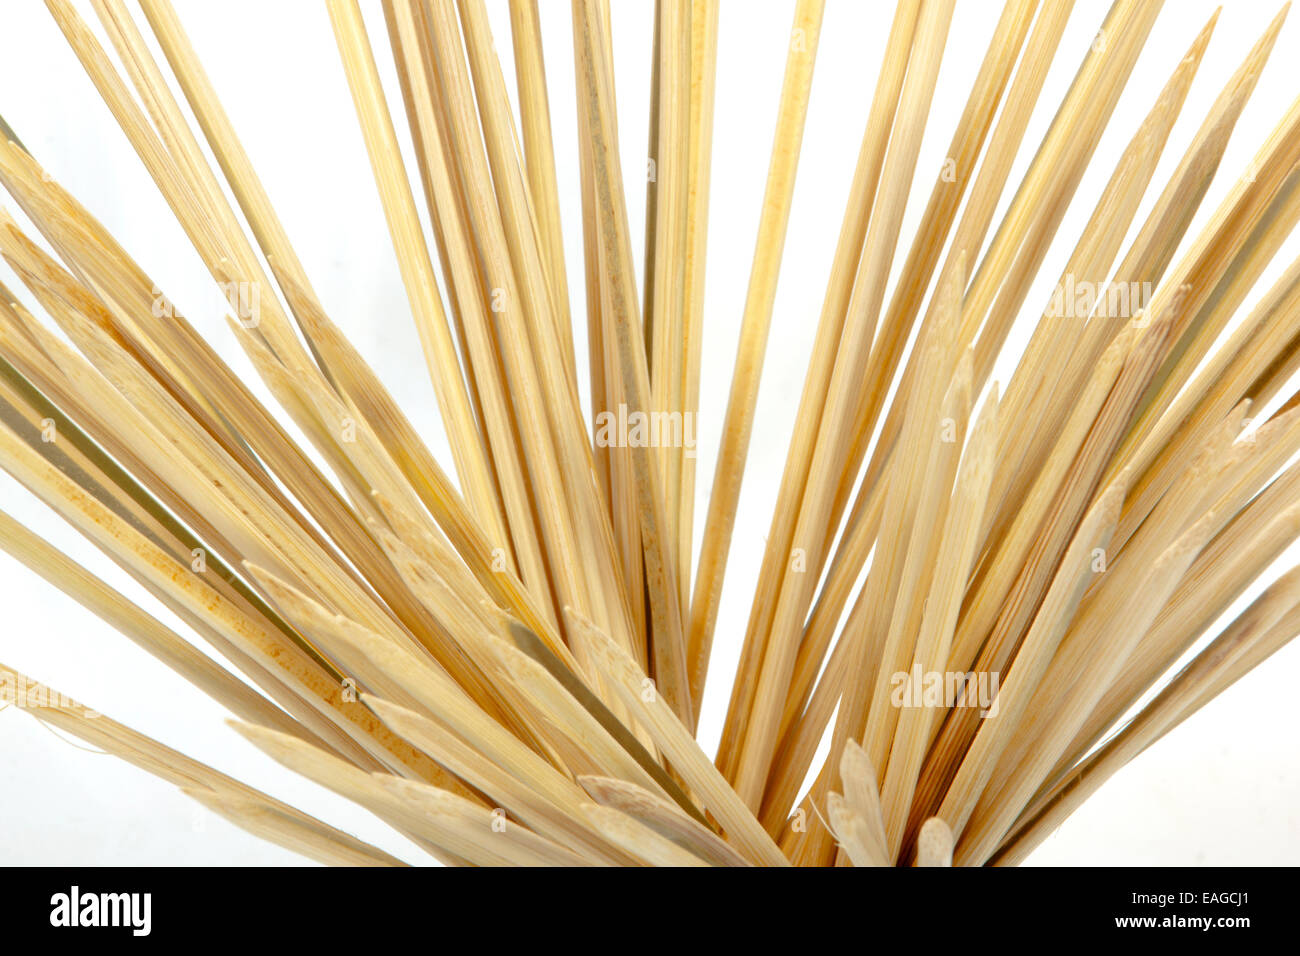 close up of wooden pegs, pointed wood pegs, wooden sticks, sharp sticks,  wooden pointed stick, wooden pointed sticks Stock Photo - Alamy